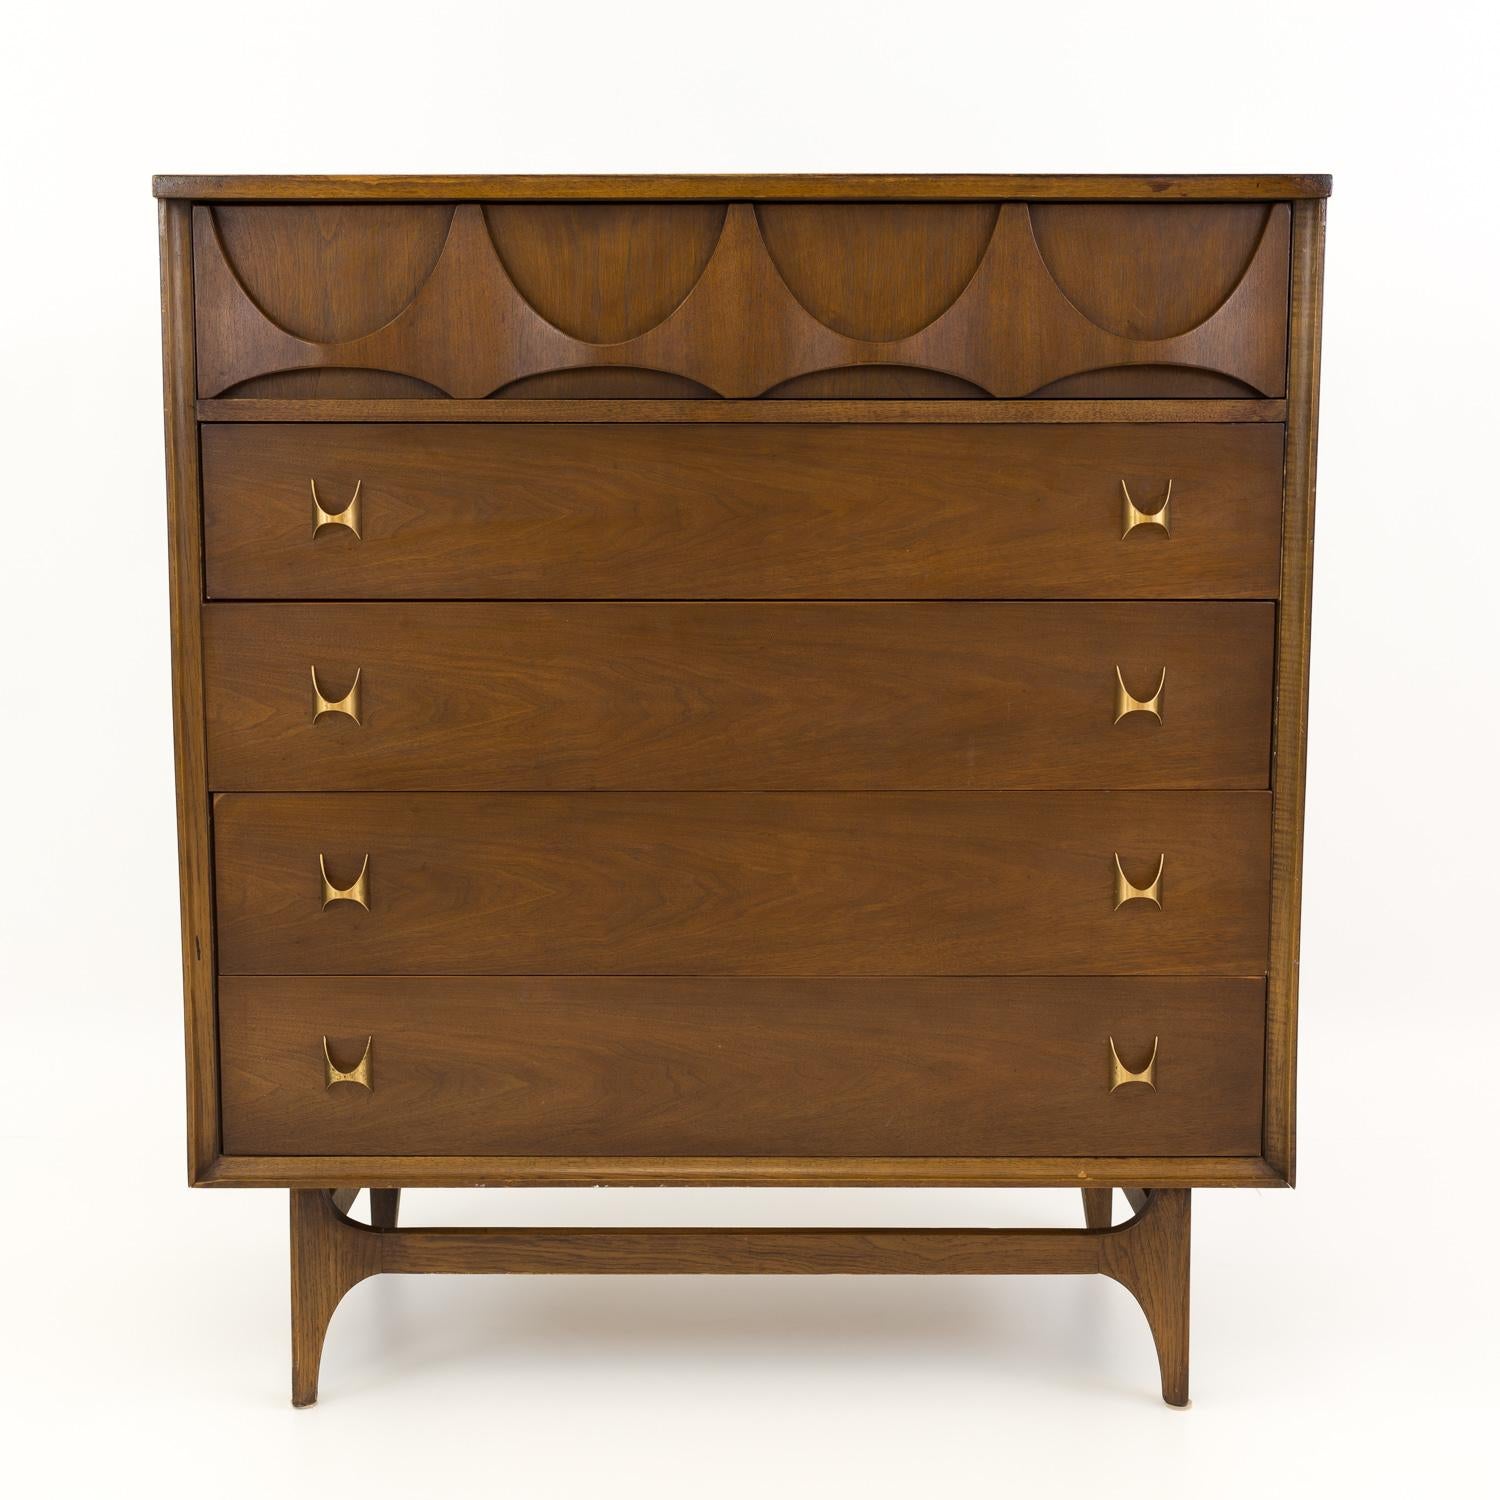 Broyhill Brasilia Mid Century Walnut and Brass 5 Drawer Highboy Dresser Chest

This dresser measures: 40 wide x 19 deep x 44.5 inches high

All pieces of furniture can be had in what we call restored vintage condition. That means the piece is